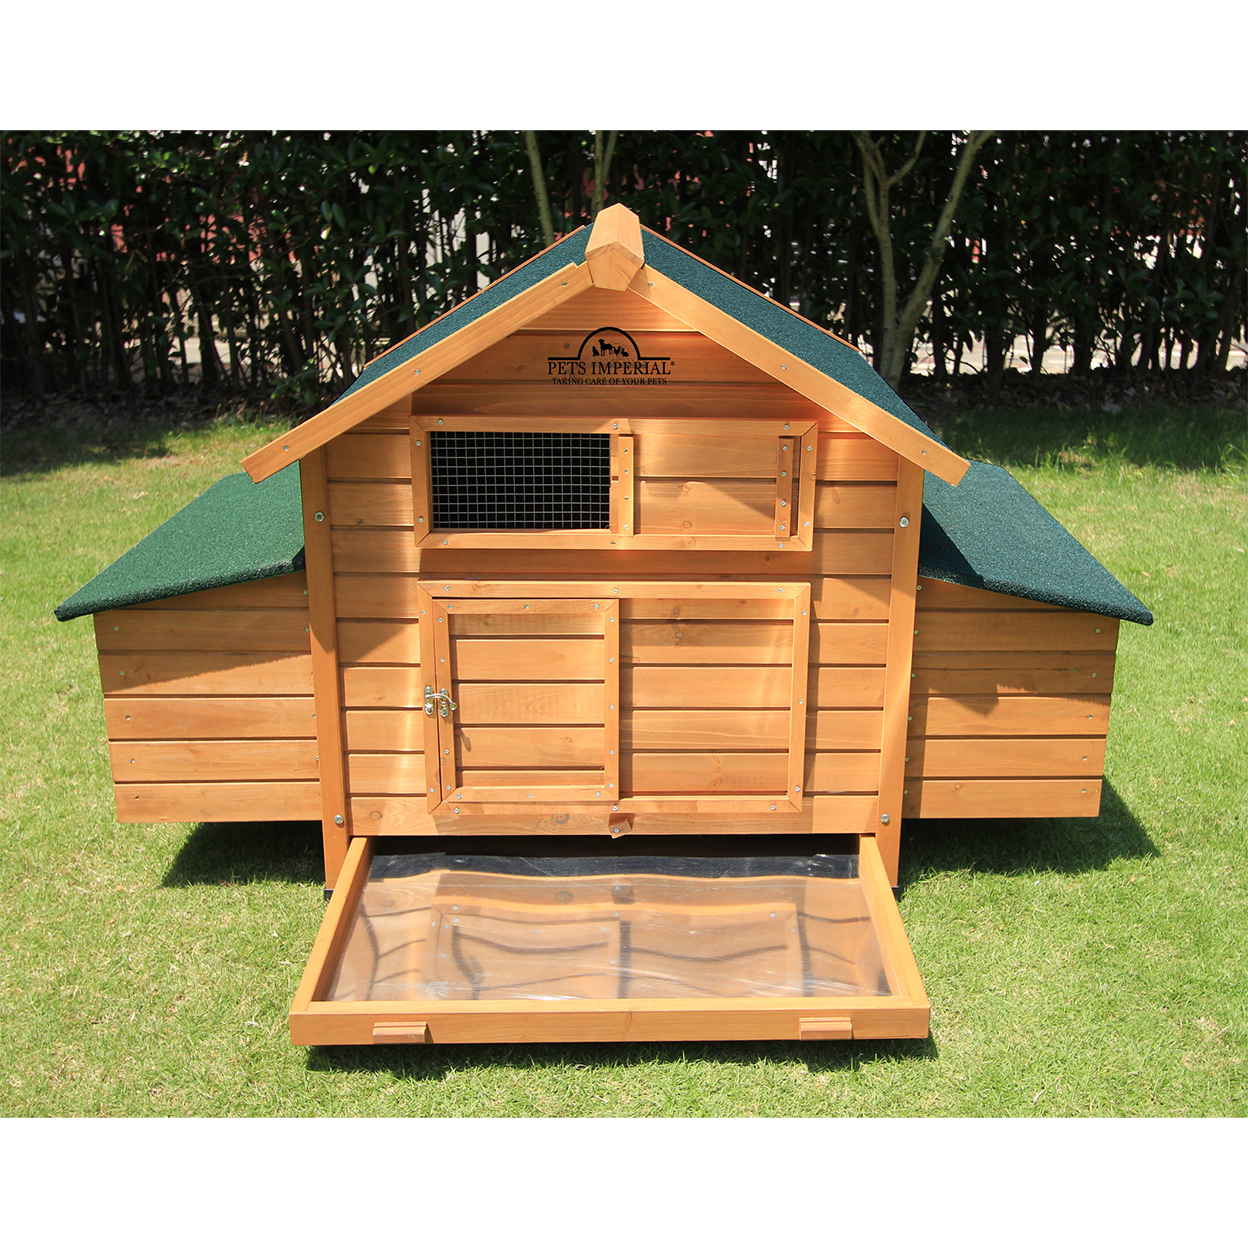 Pets Imperial Double Savoy Large Chicken Coop With 2 Nest Boxes Suitable Up To 10 Small Birds